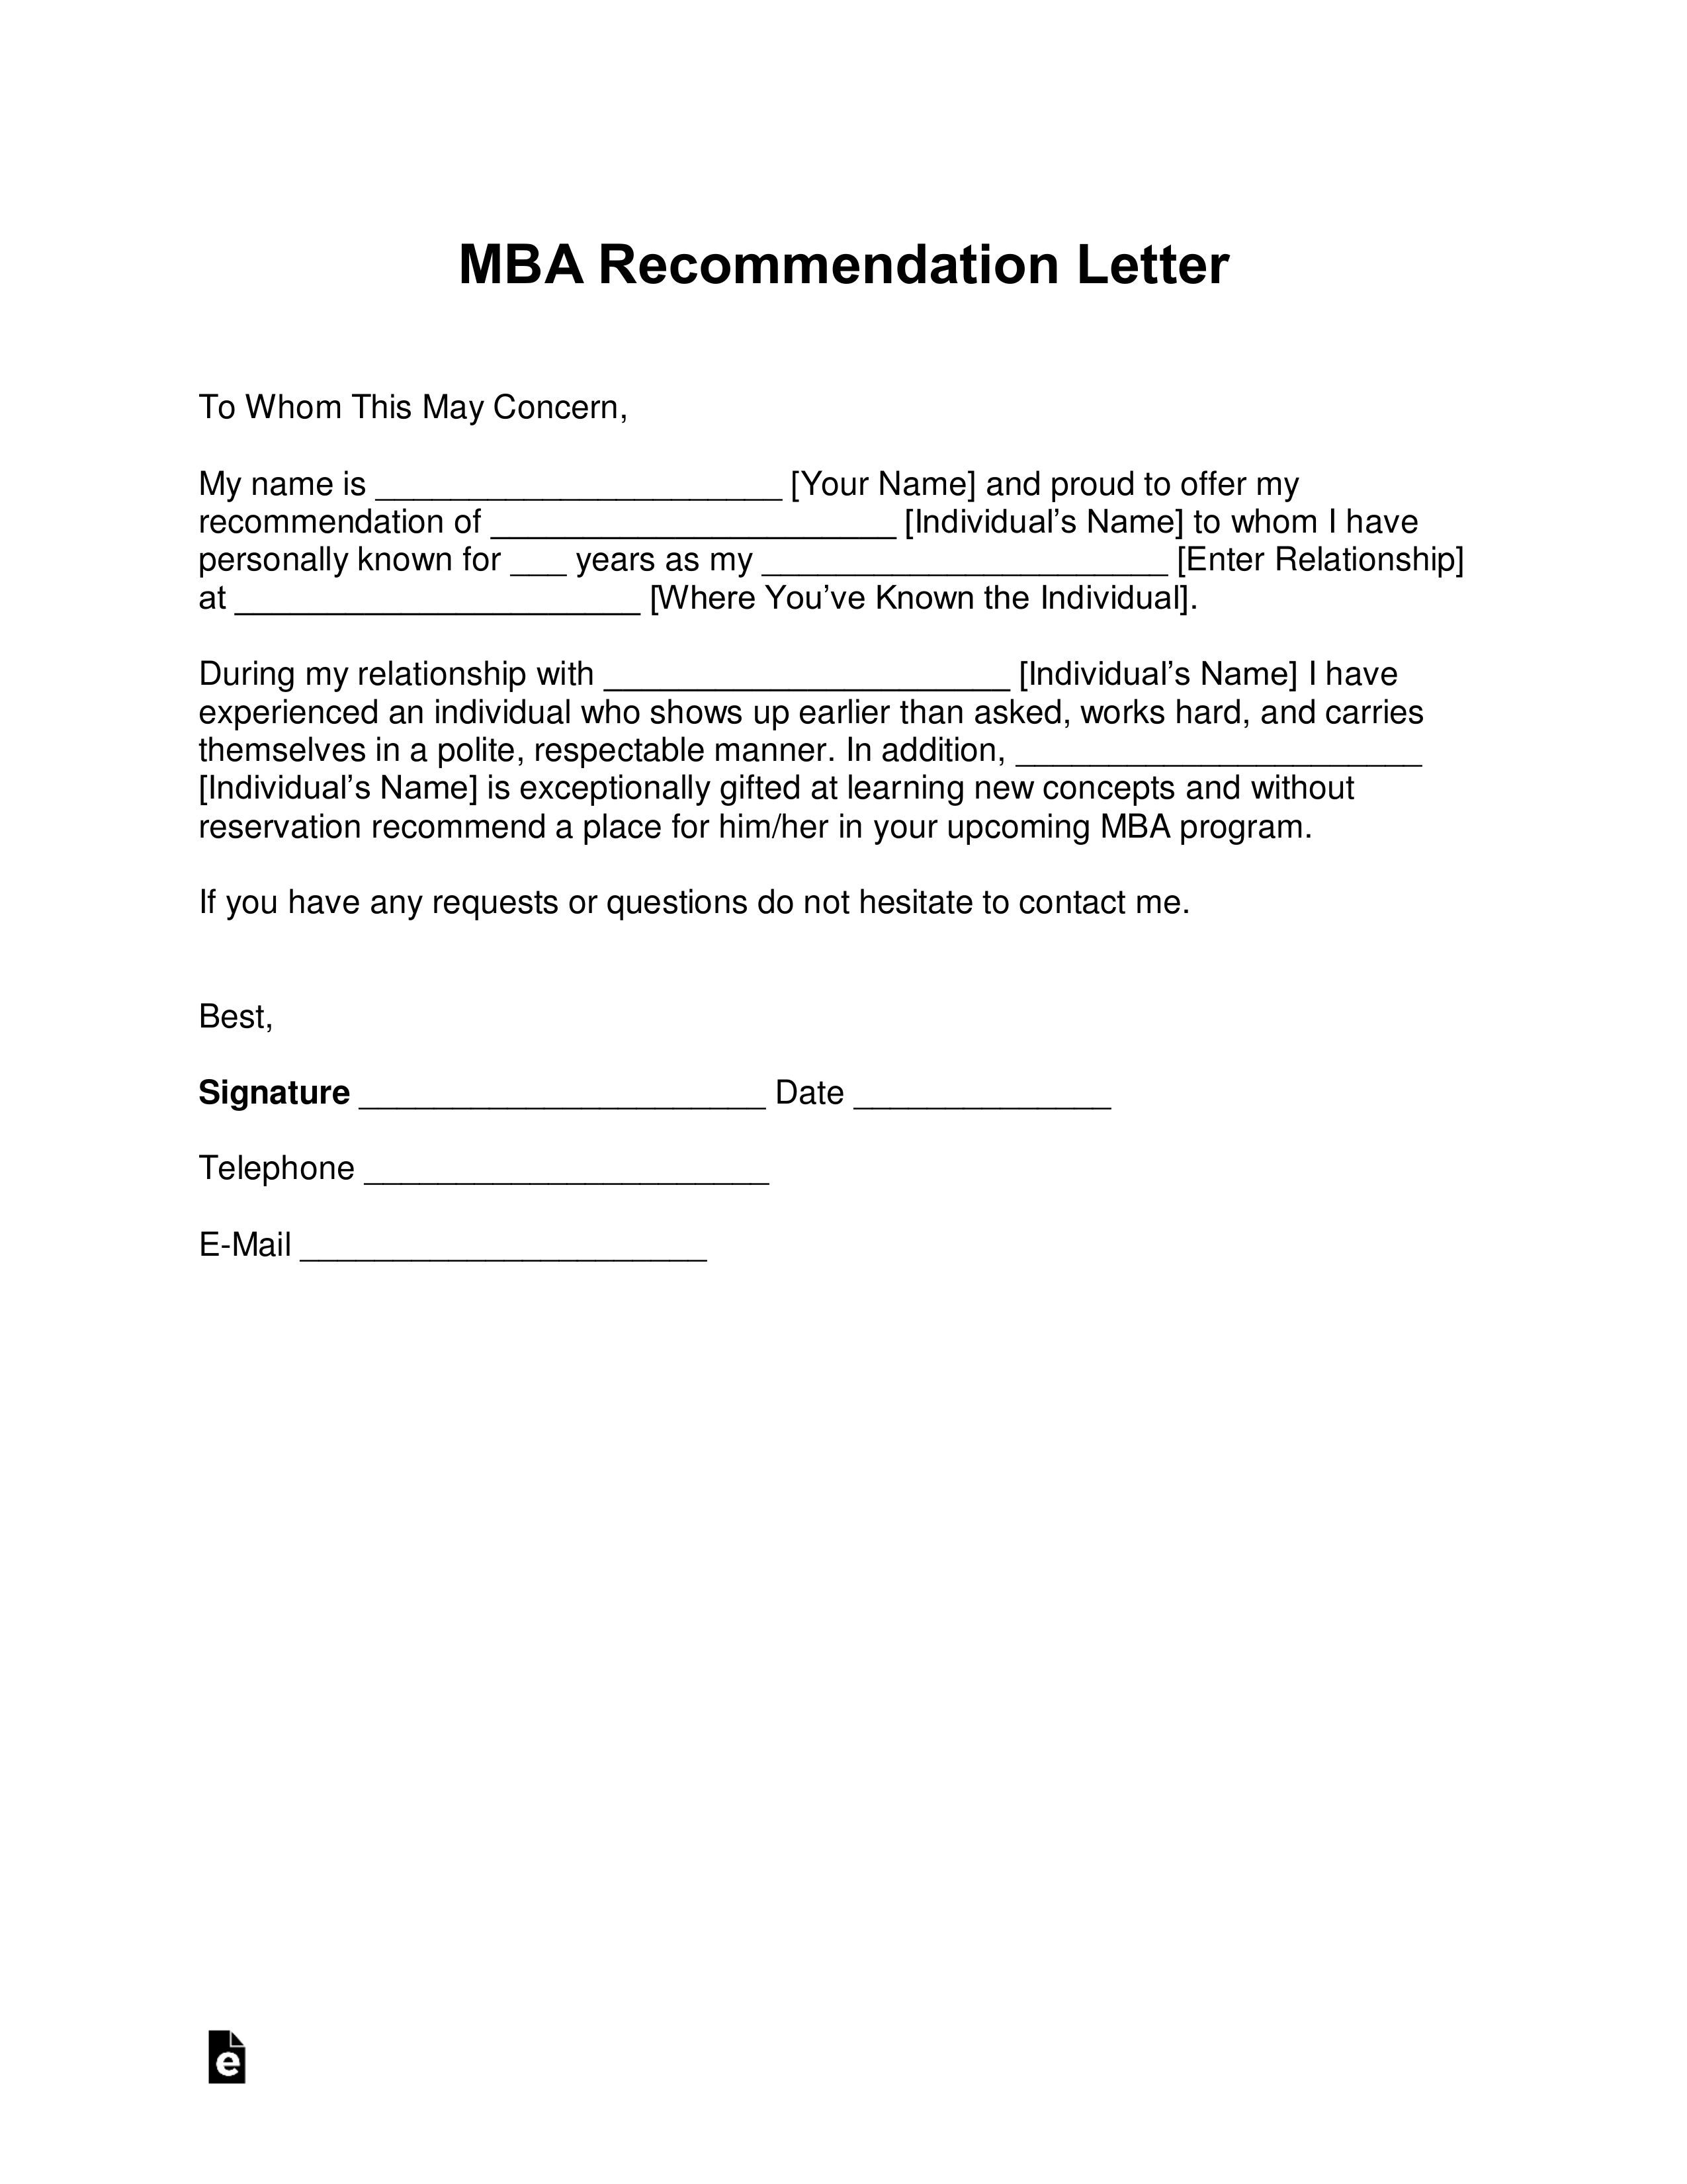 Letter Of Recommendation For A Company from eforms.com